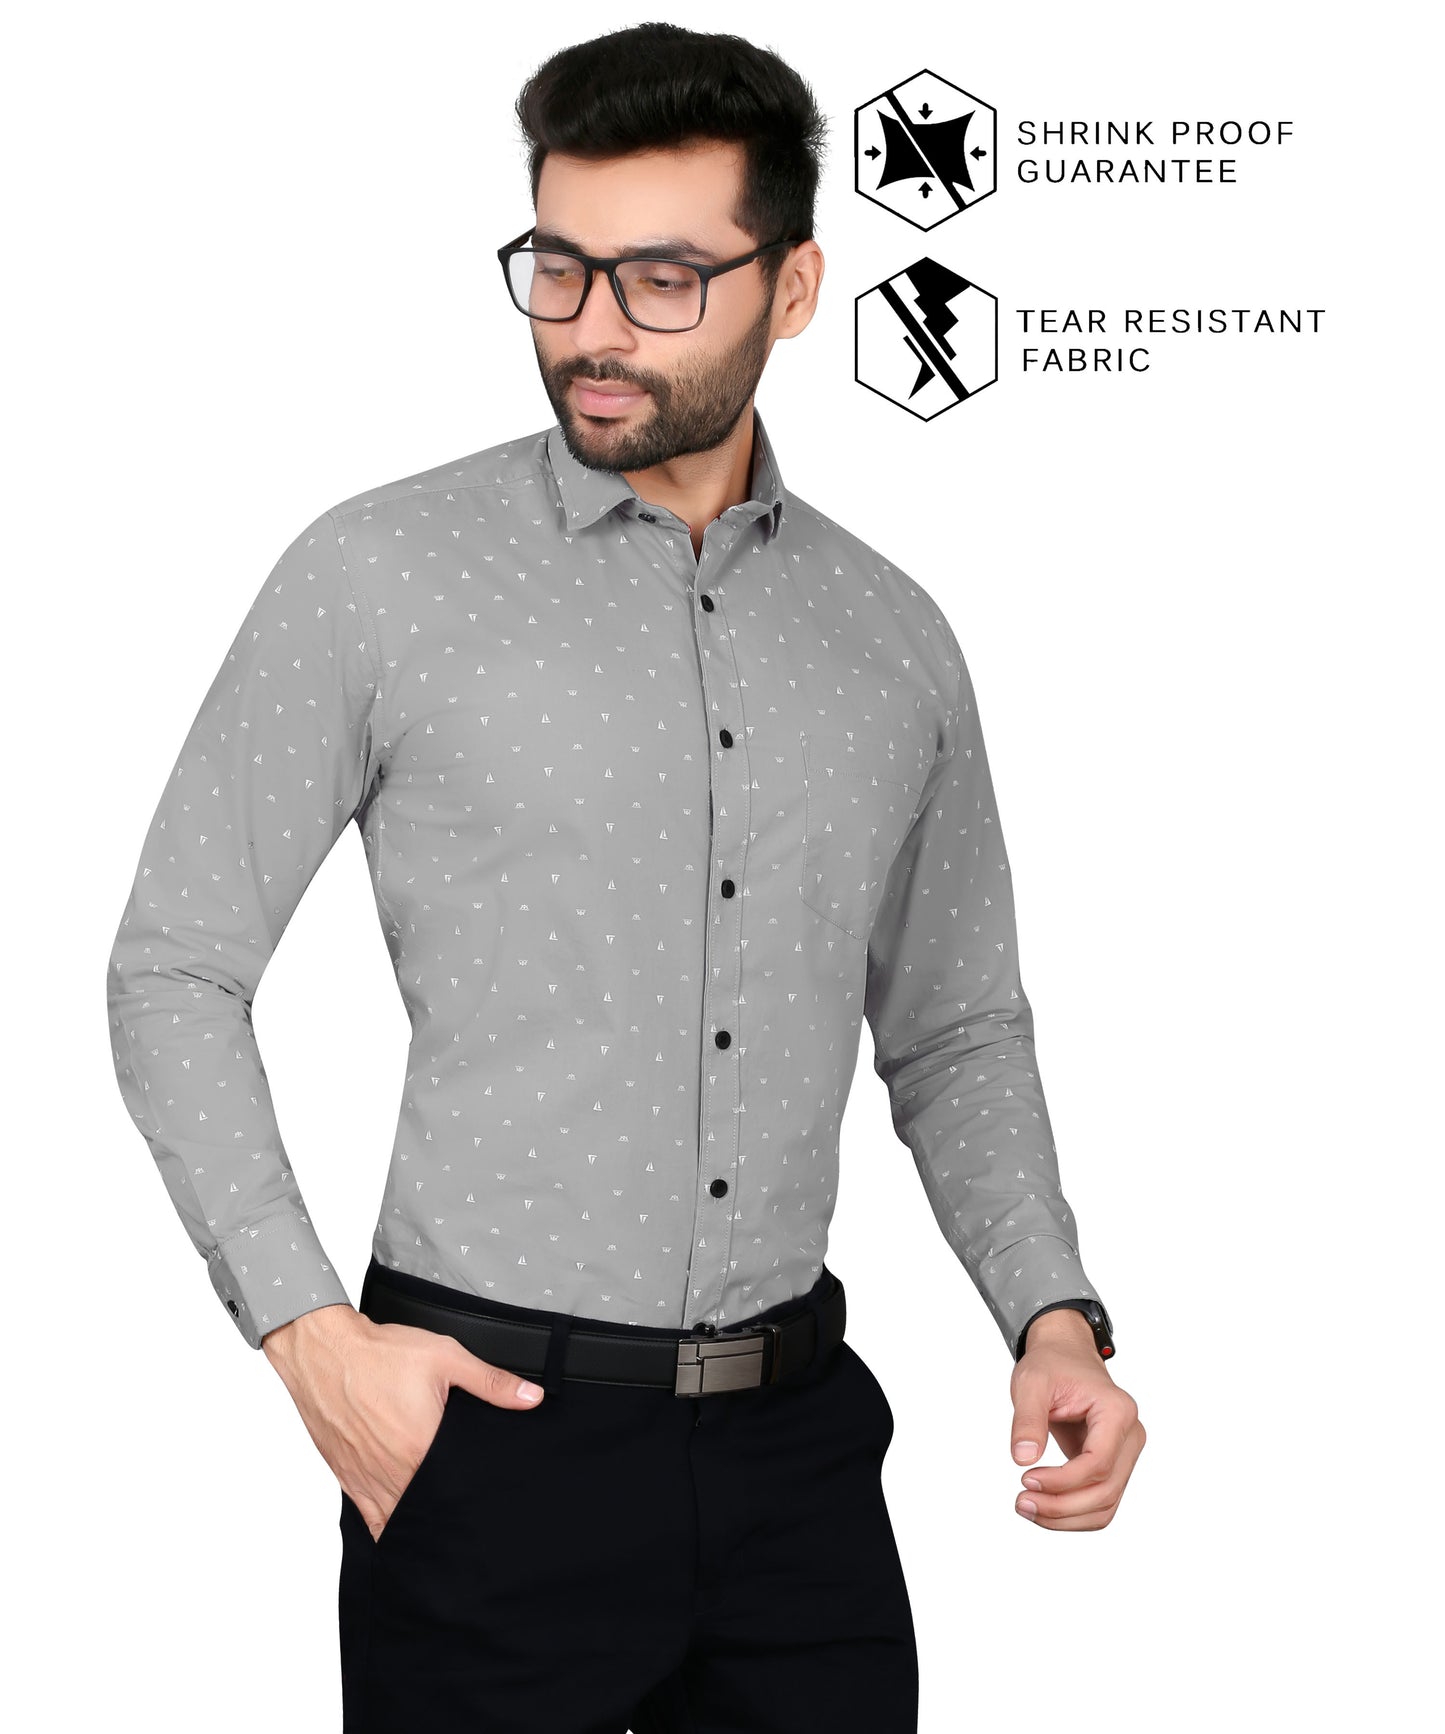 5thanfold Men's Formal Pure Cotton Full Sleeve Printed Grey Slim Fit Shirt